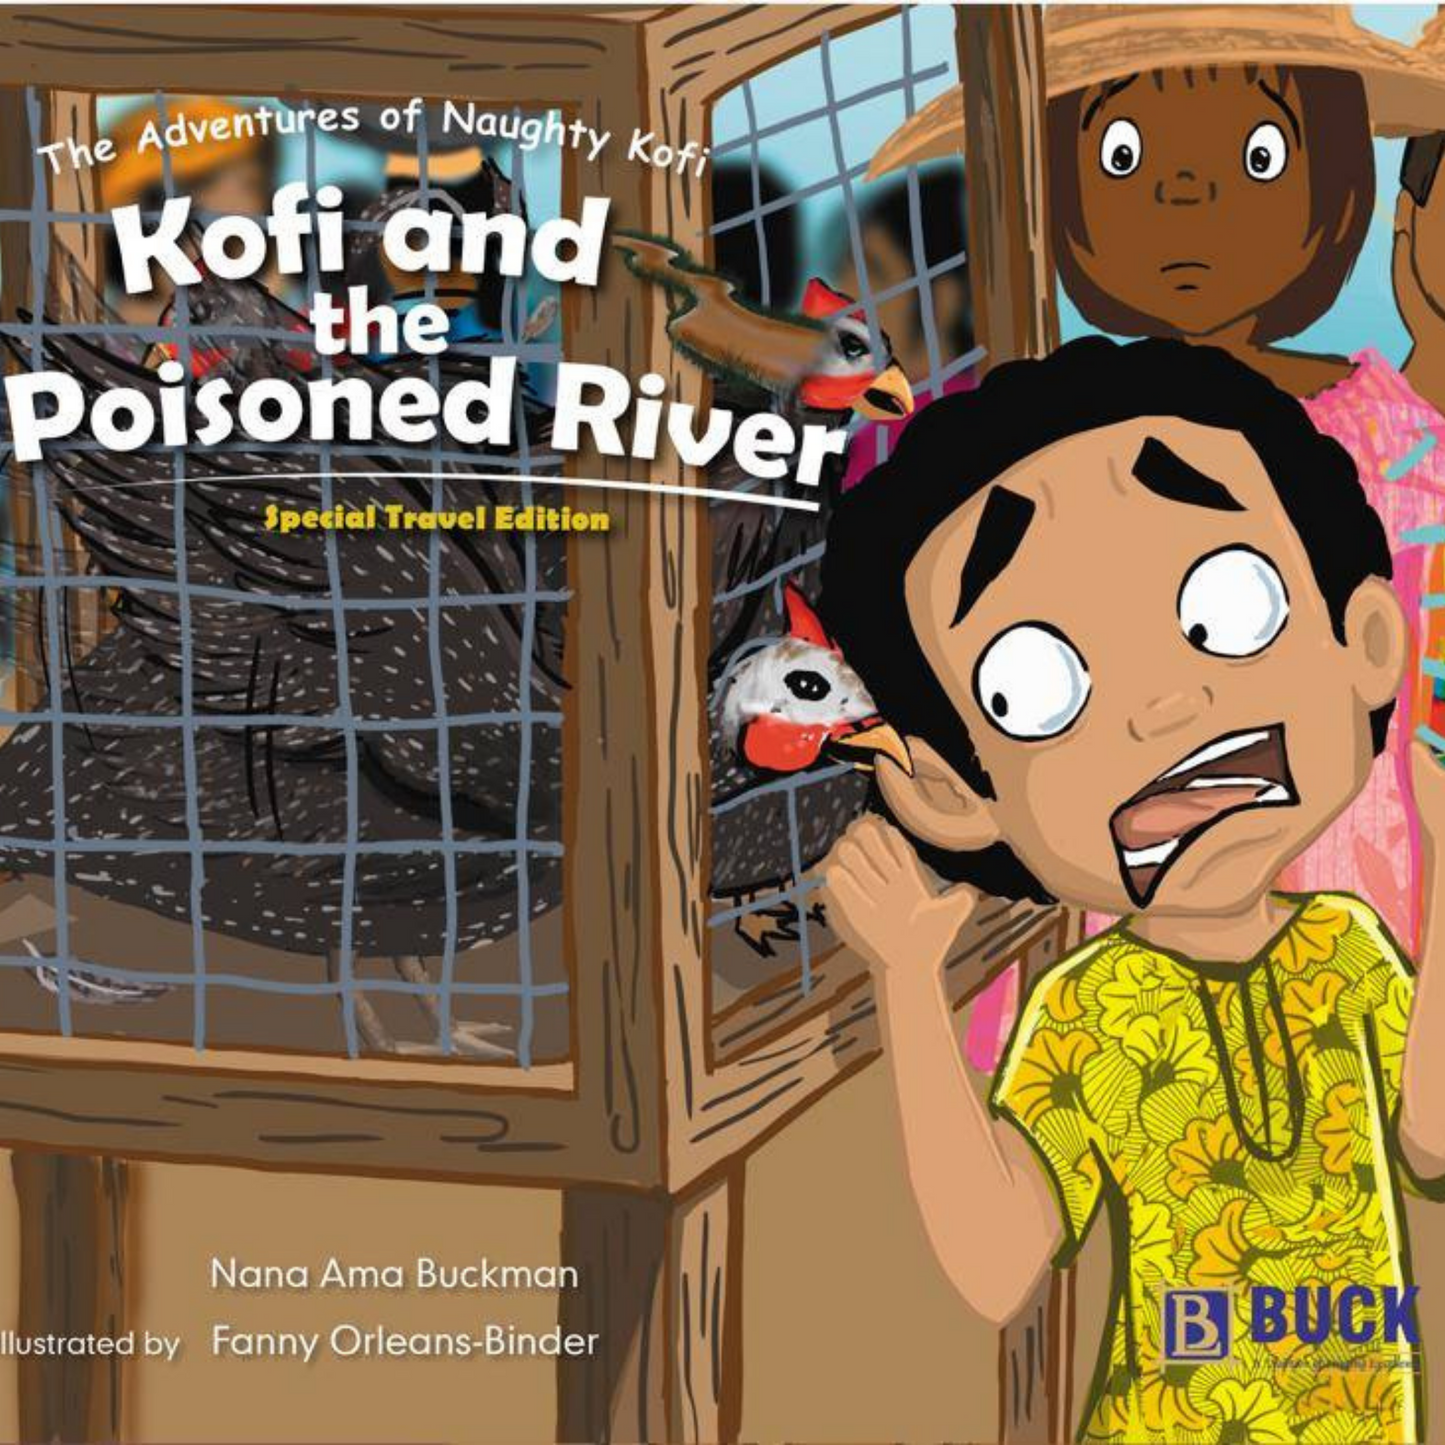 Kofi and the poisoned river